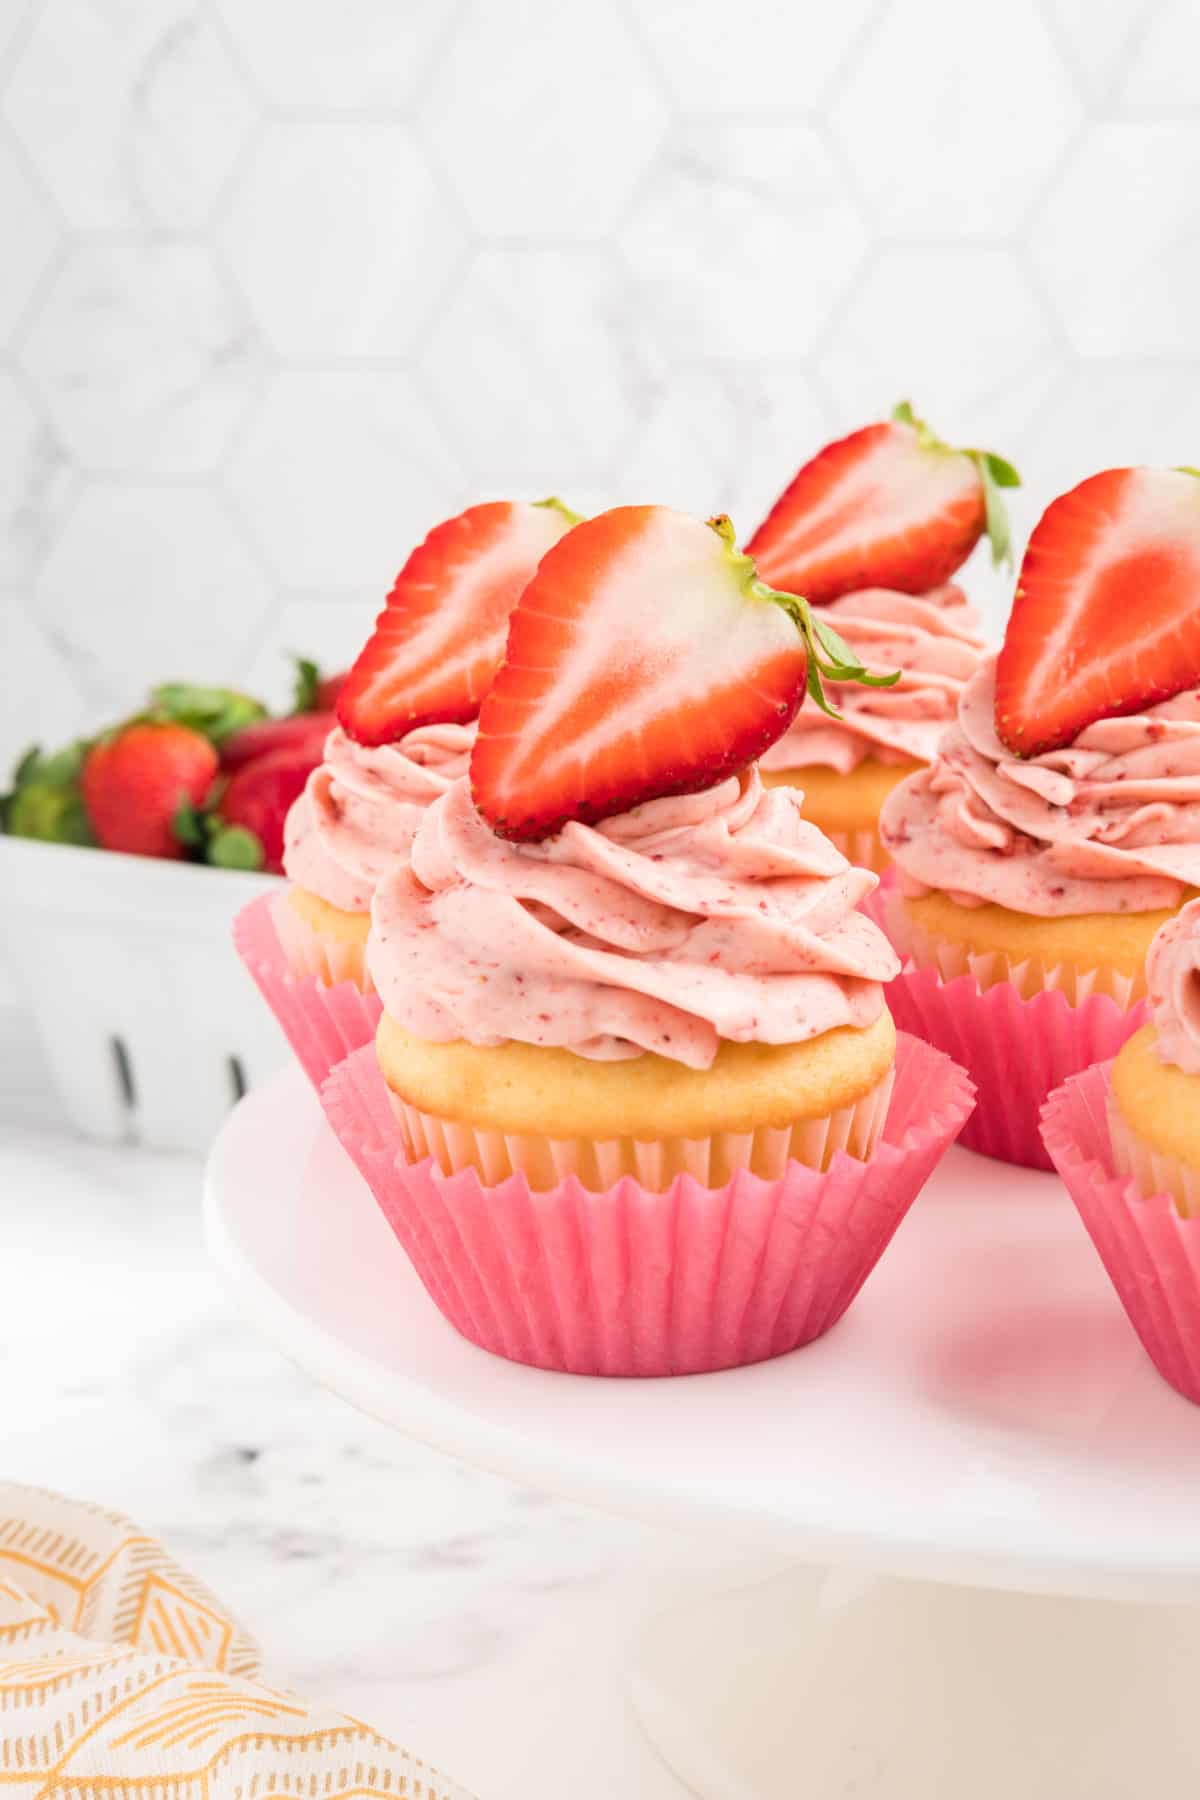 Strawberry filled cupcakes topped with fresh strawberries on a cake stand.